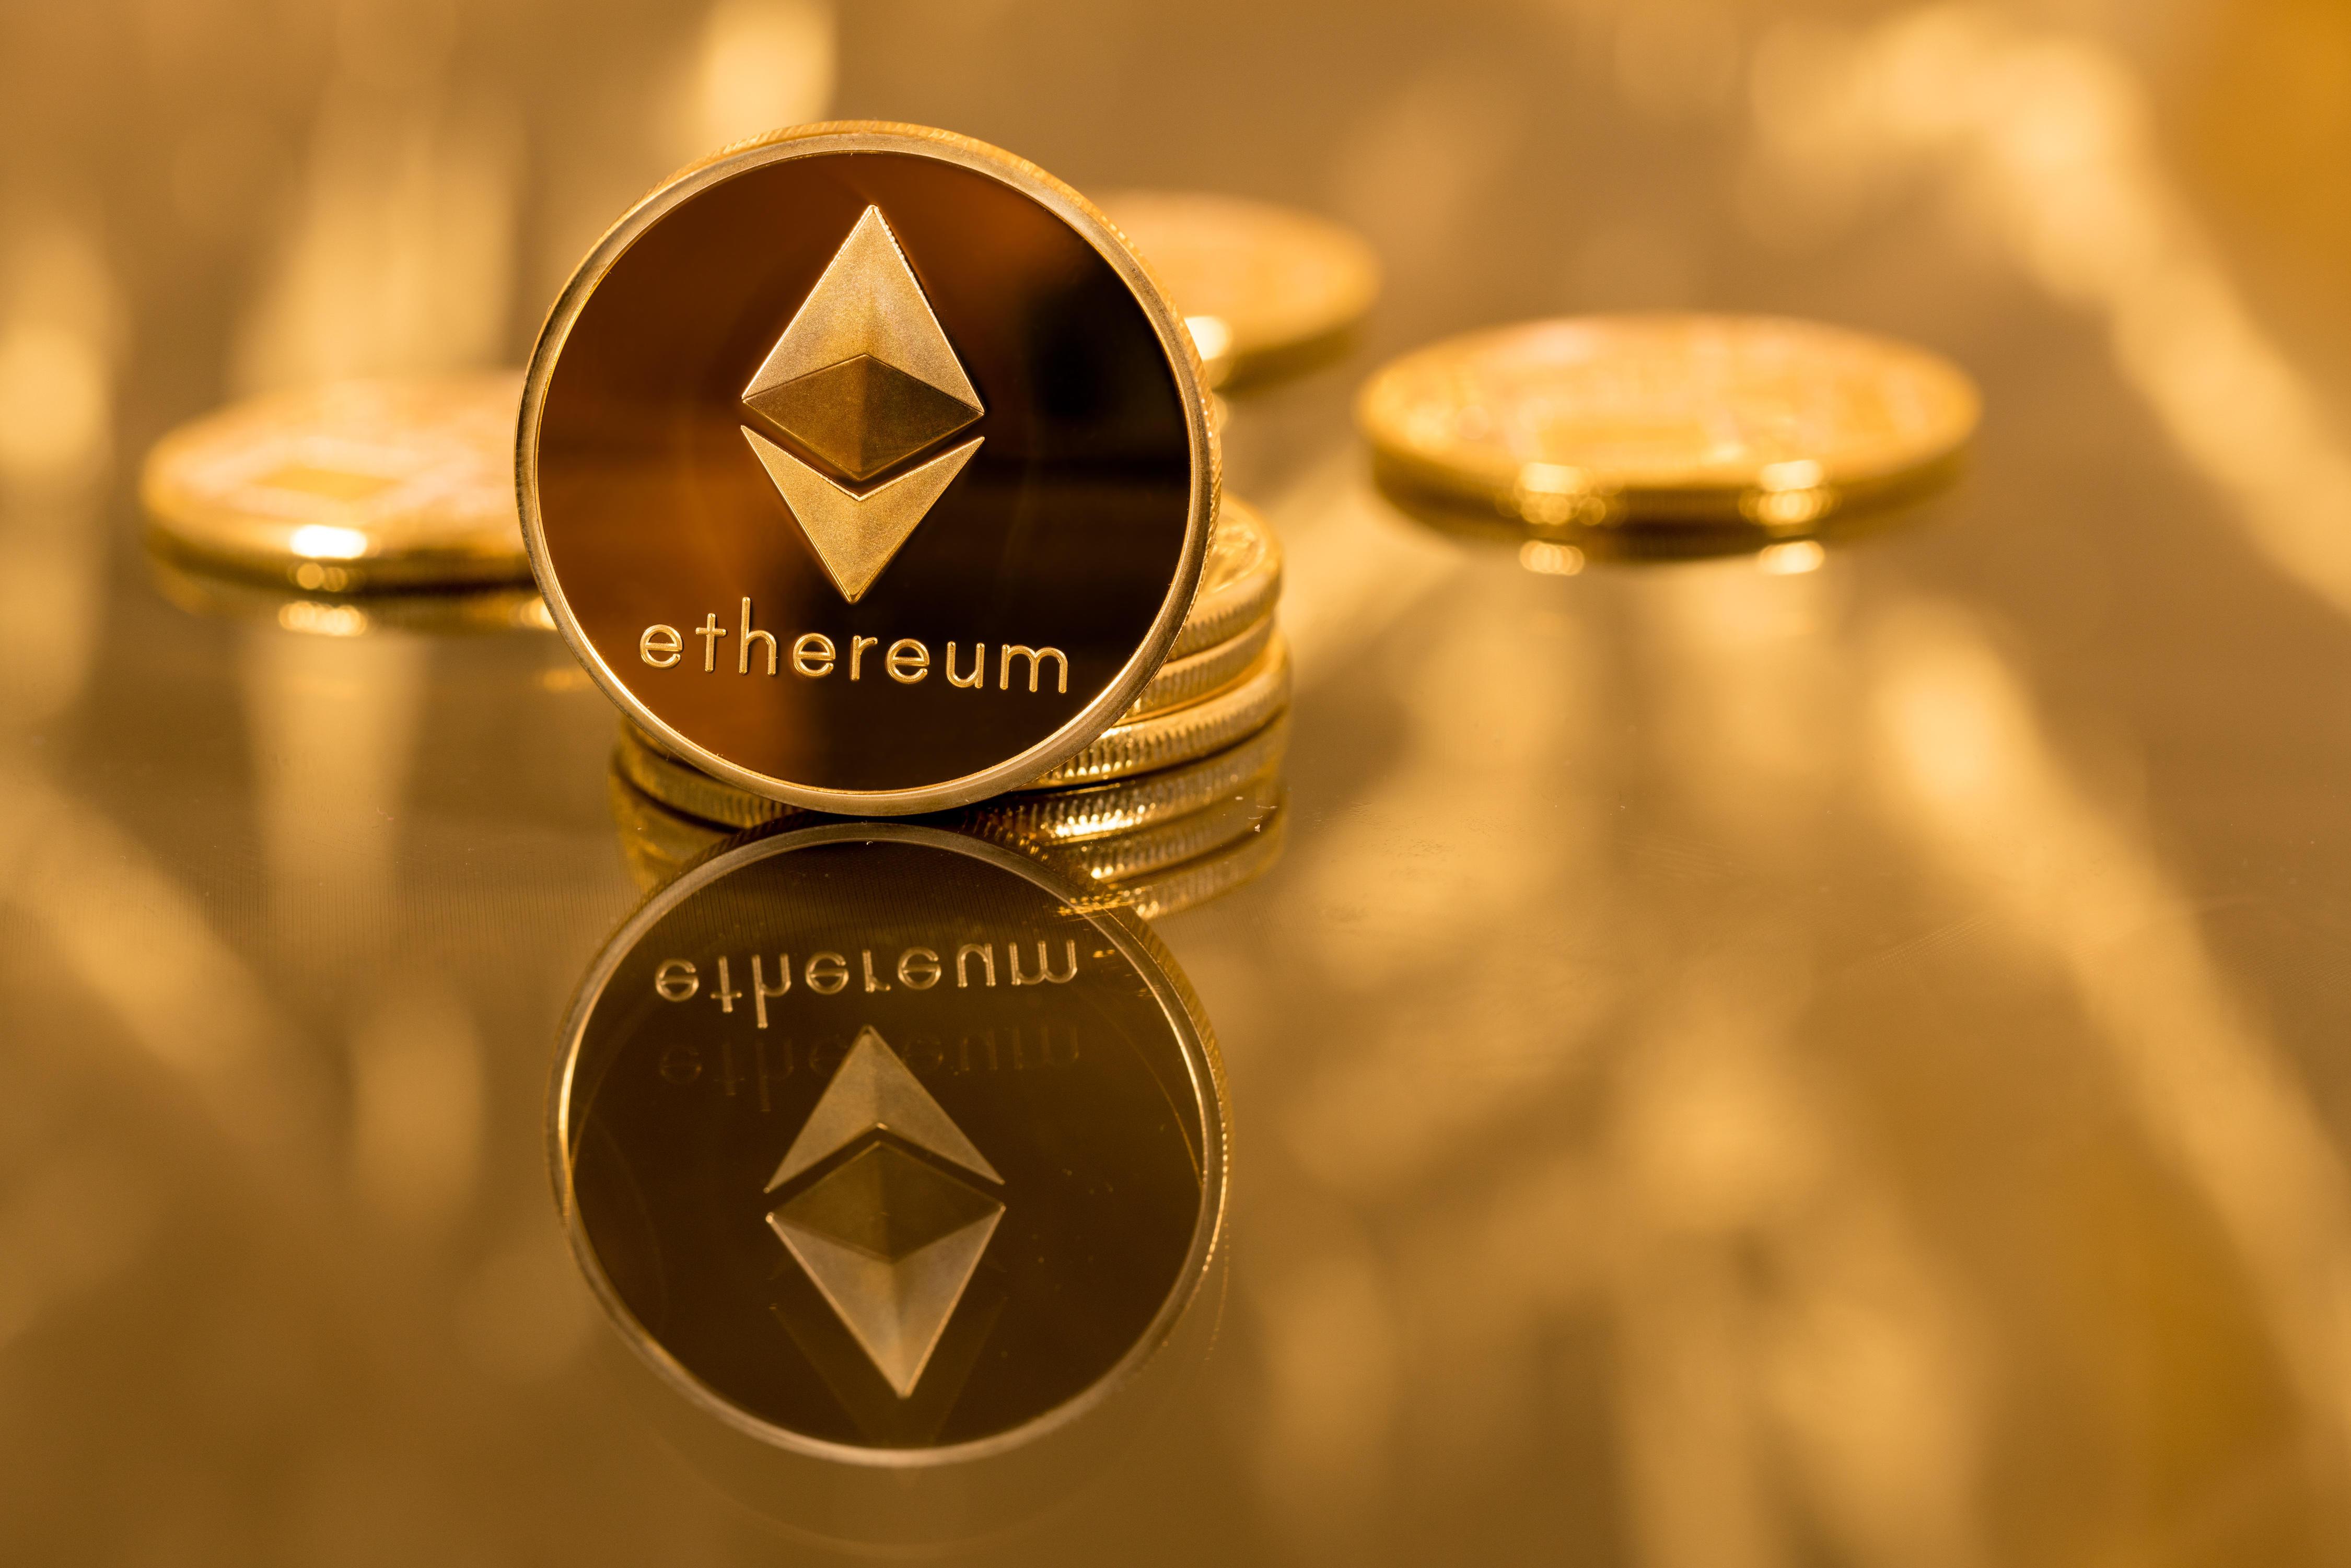 Ethereum price predictions for 2021